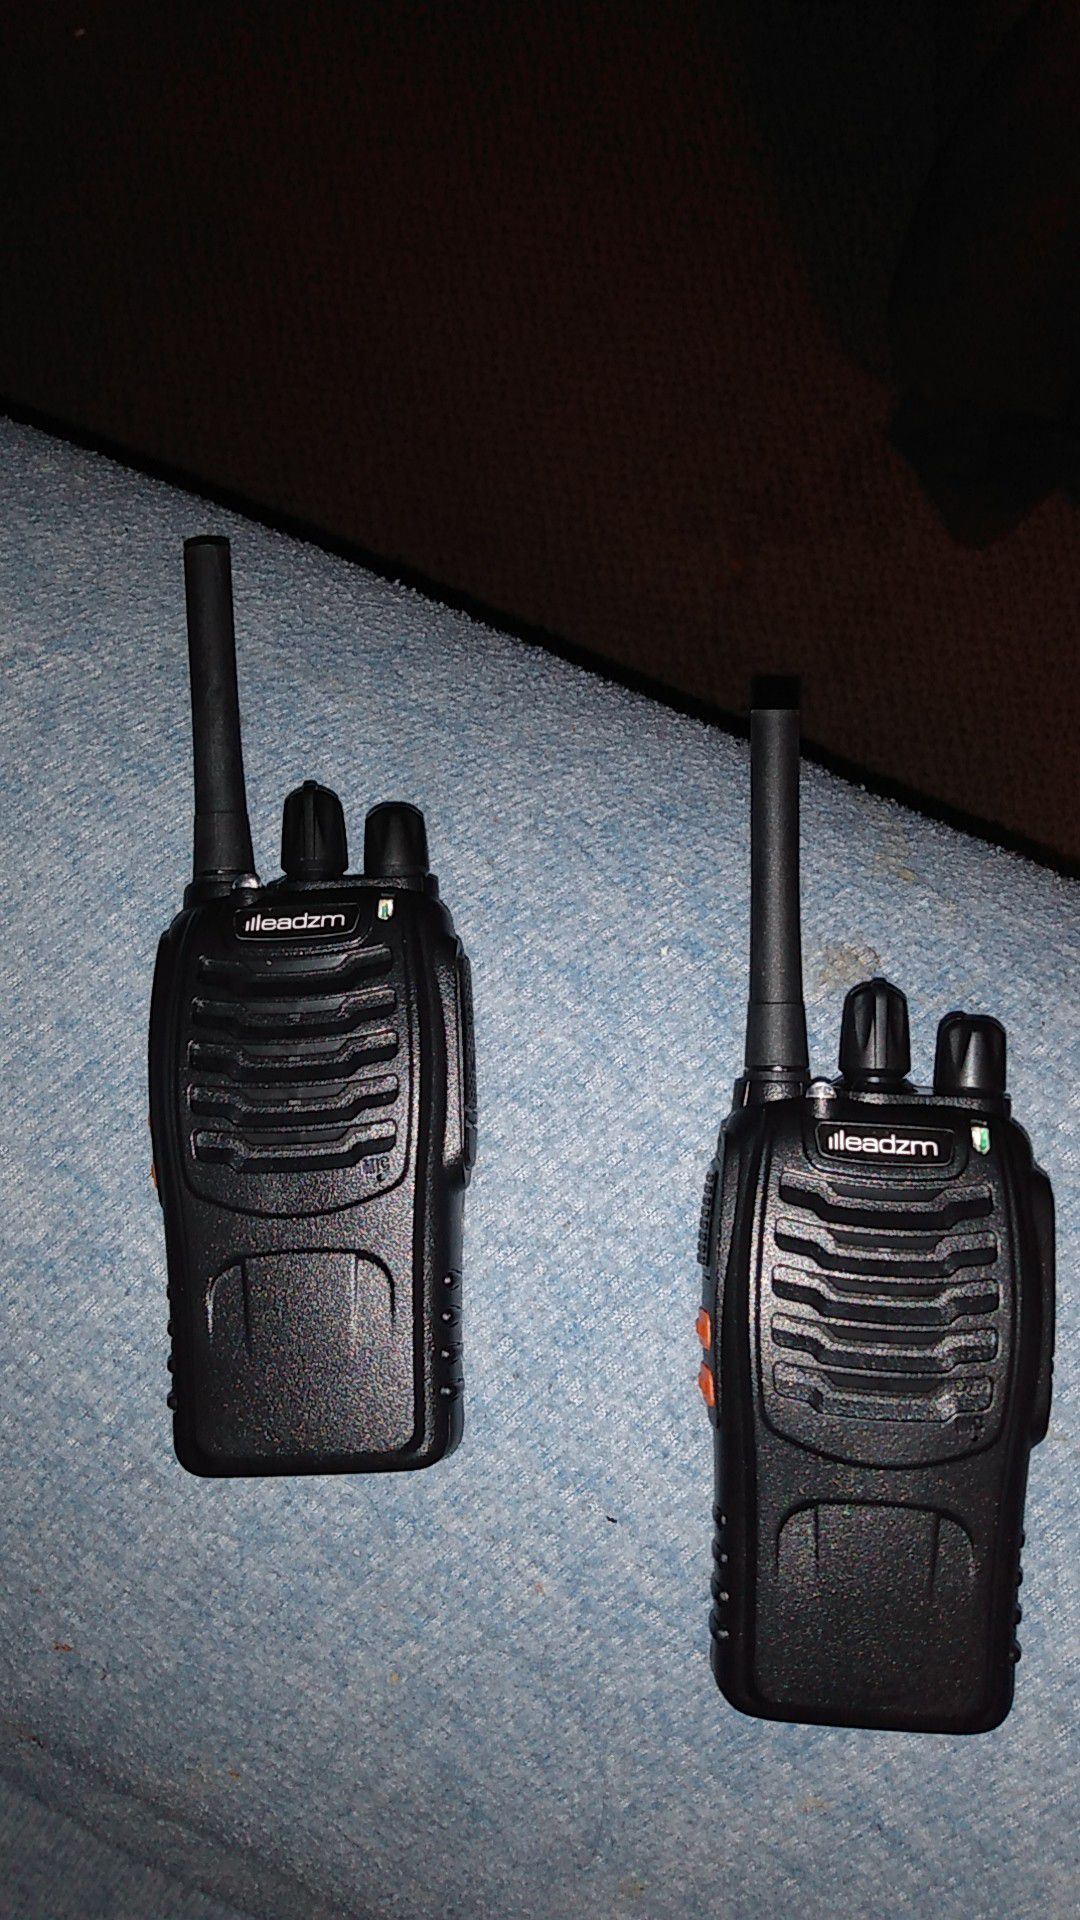 I have a two two-way radio for sale